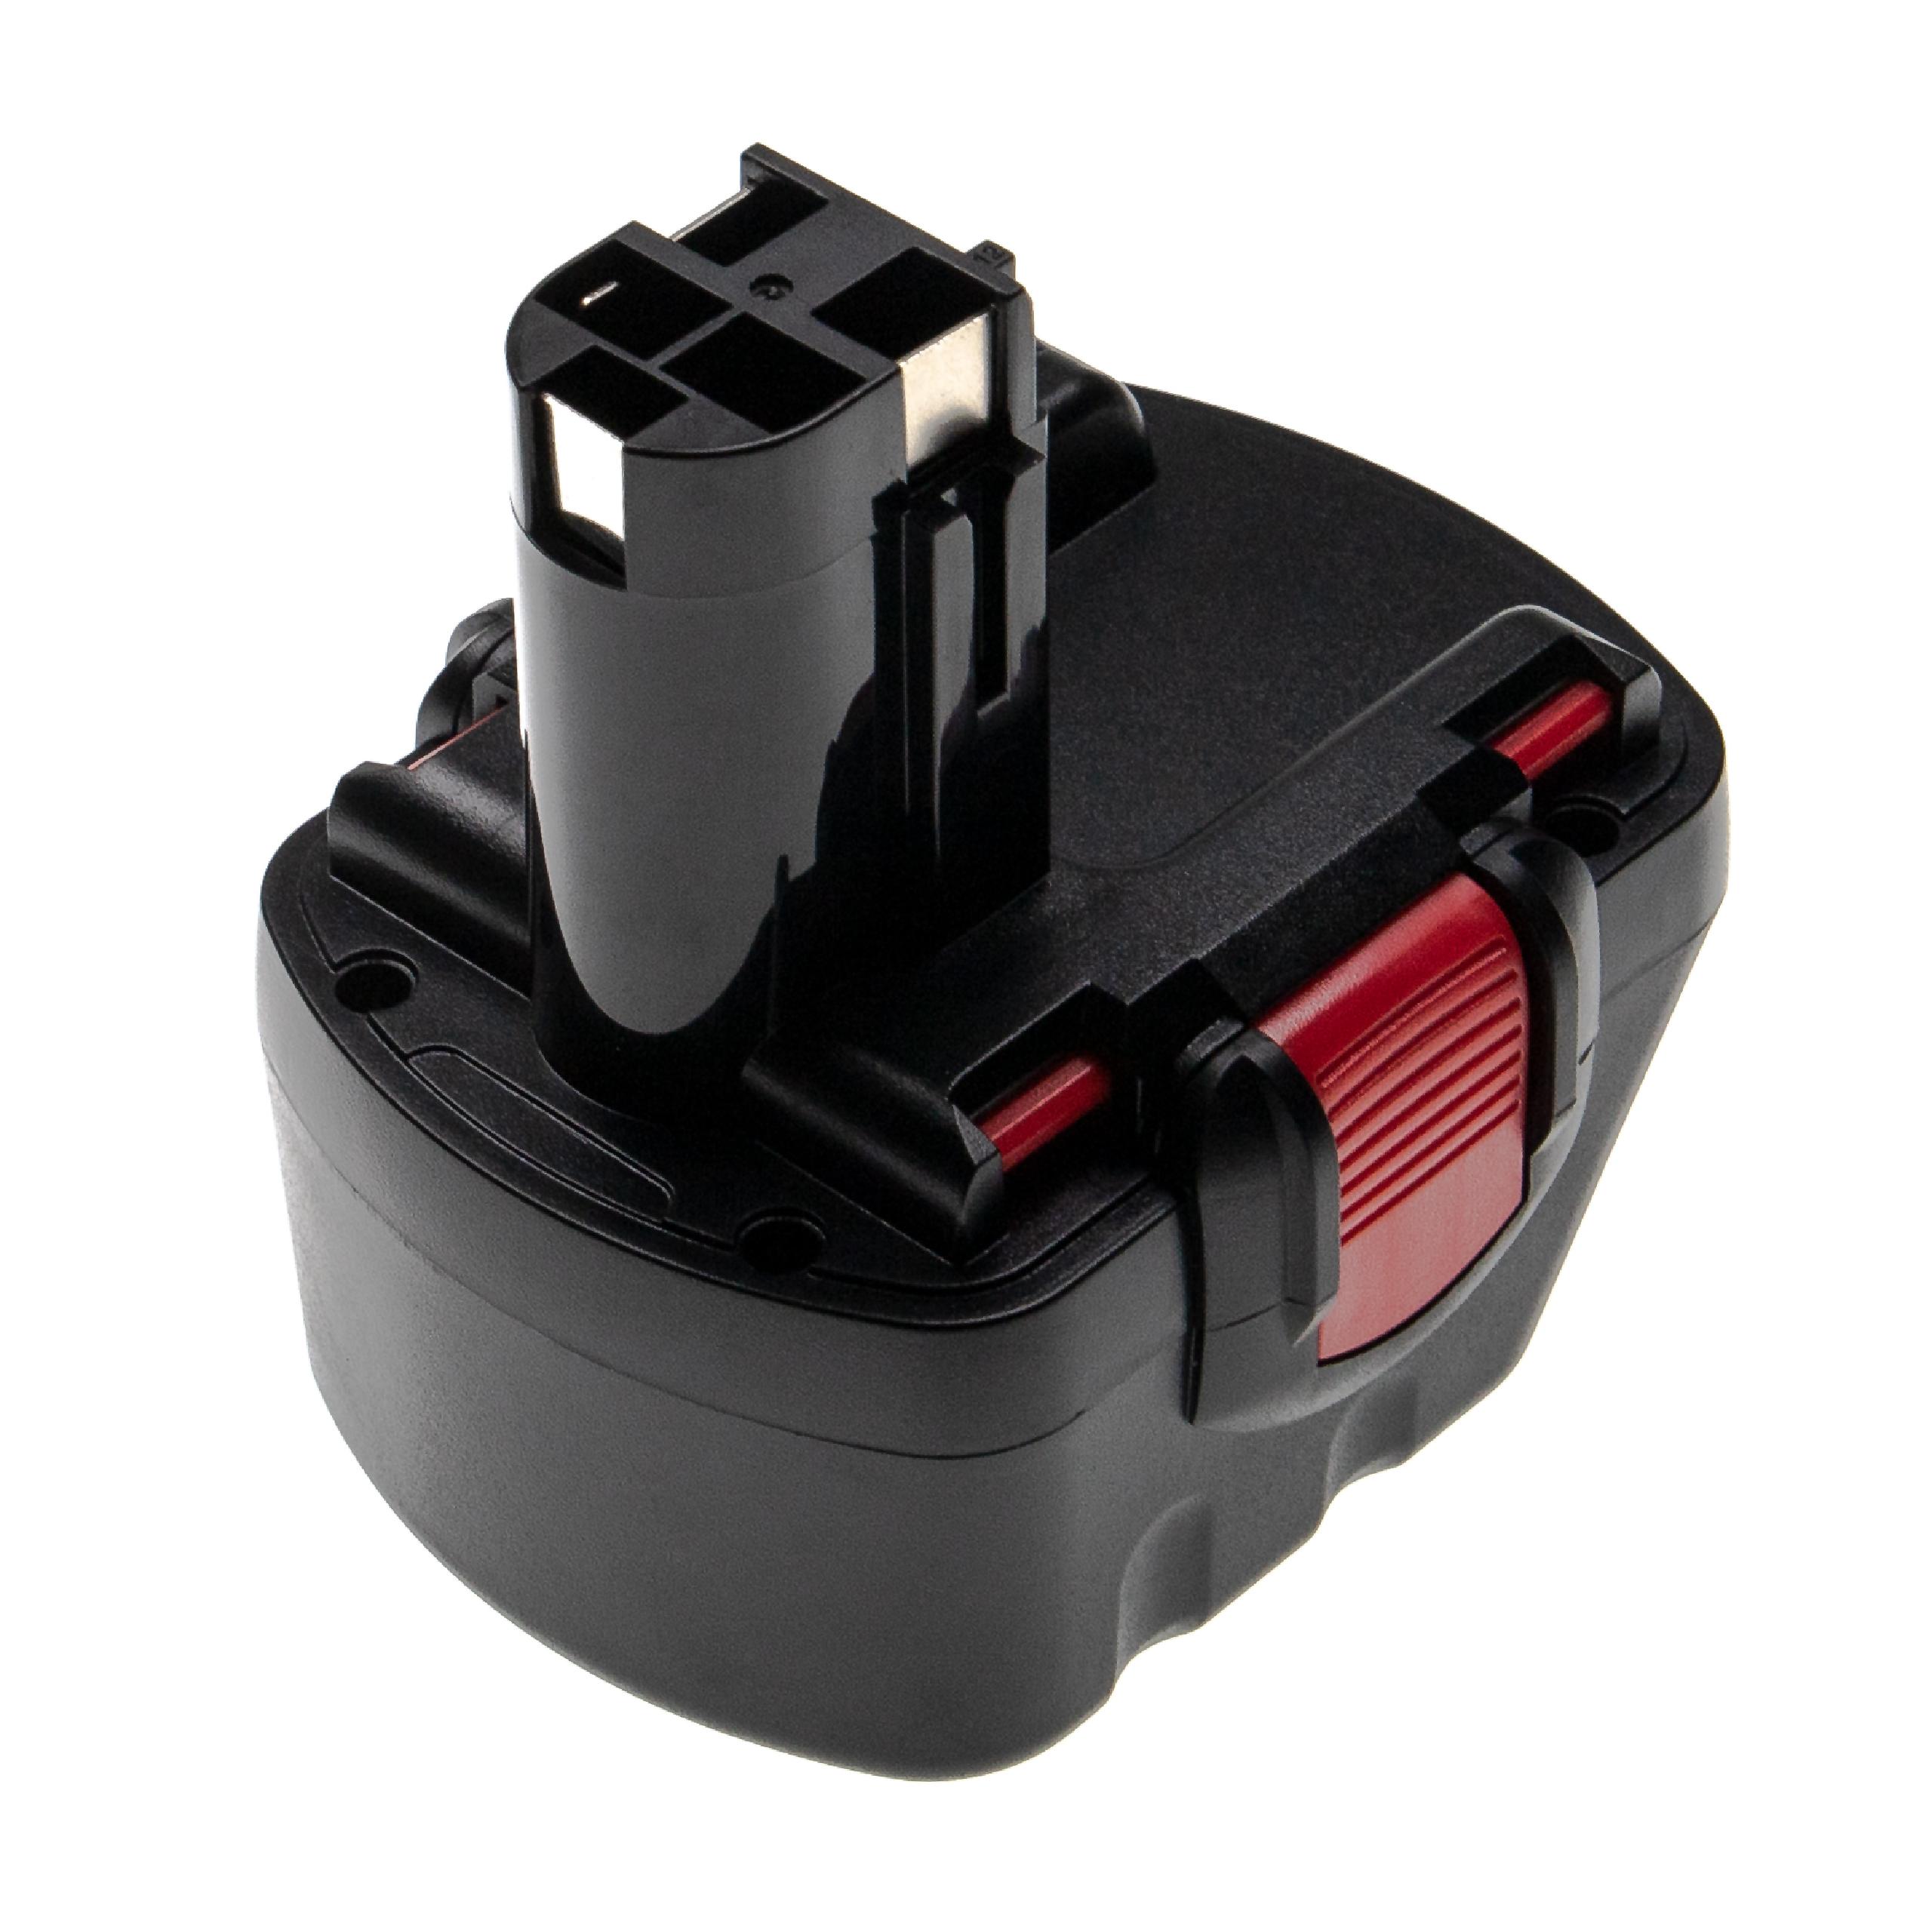 Electric Power Tool Battery Replaces Bosch 2 607 335 261, 2 607 335 262, 2 60 7335 249 - 3300 mAh, 12 V, NiMH